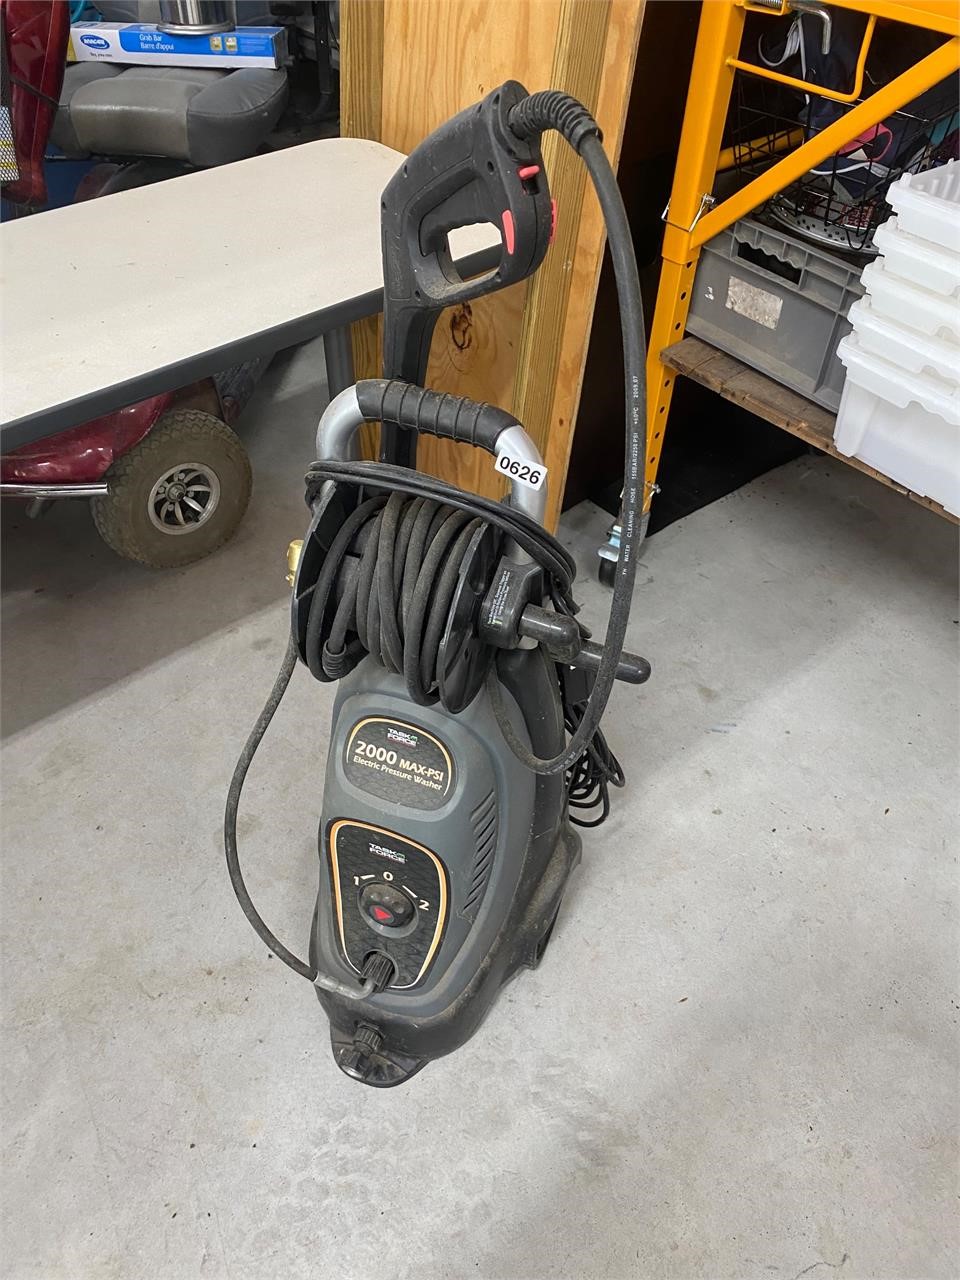 Task Force 2000 PSI electric pressure washer